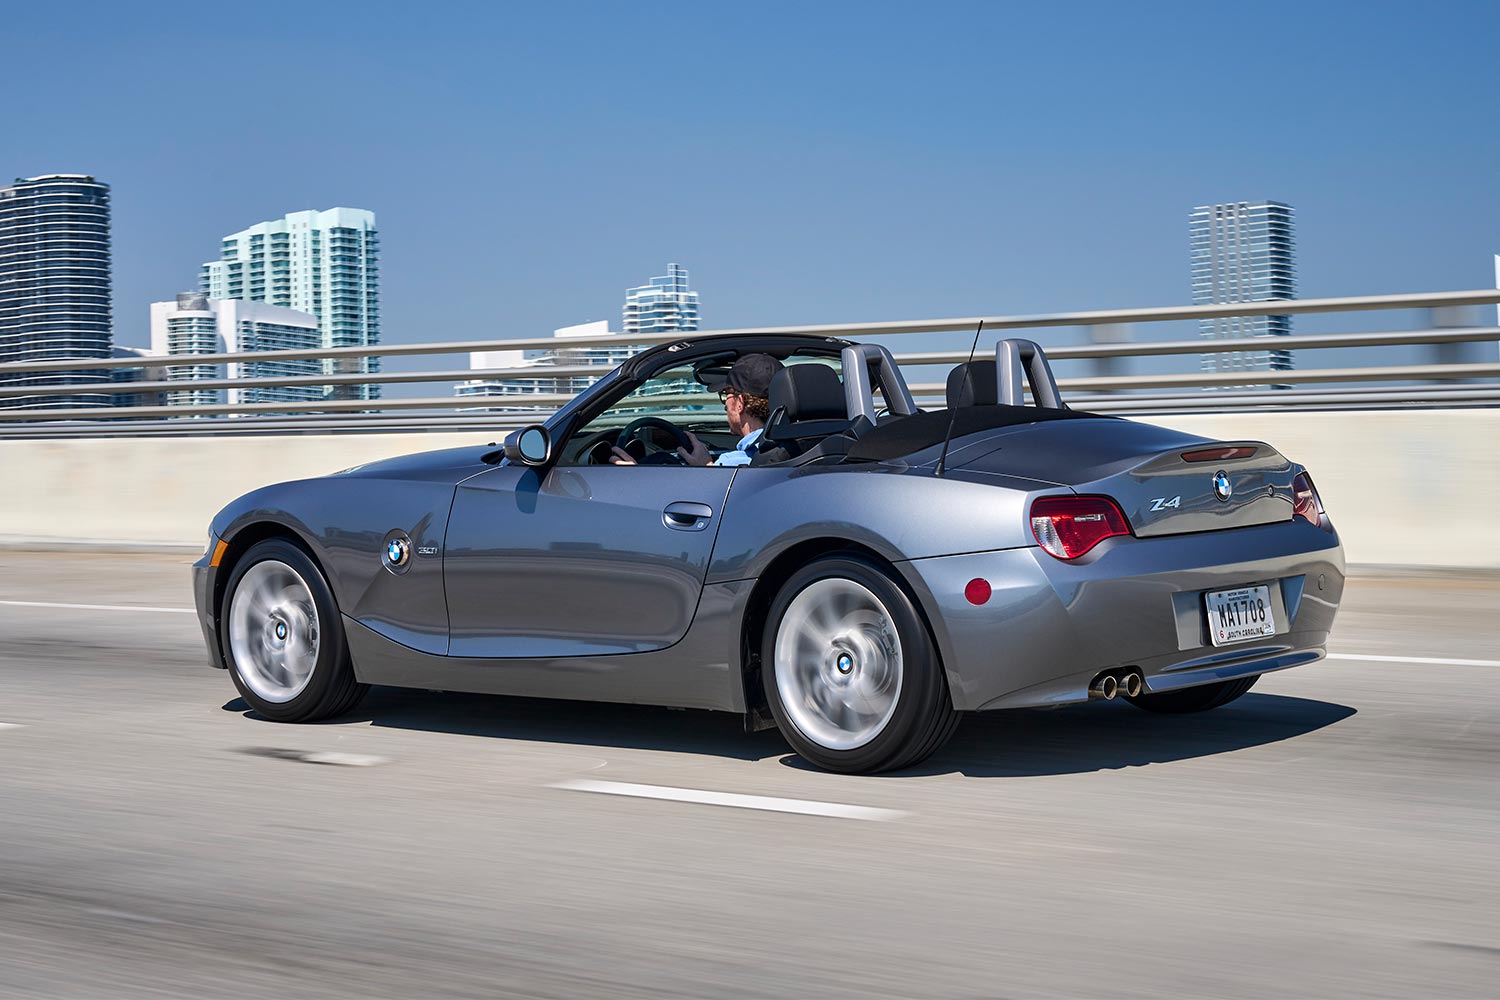 The 2008 BMW Z4 3.0i driving in Florida